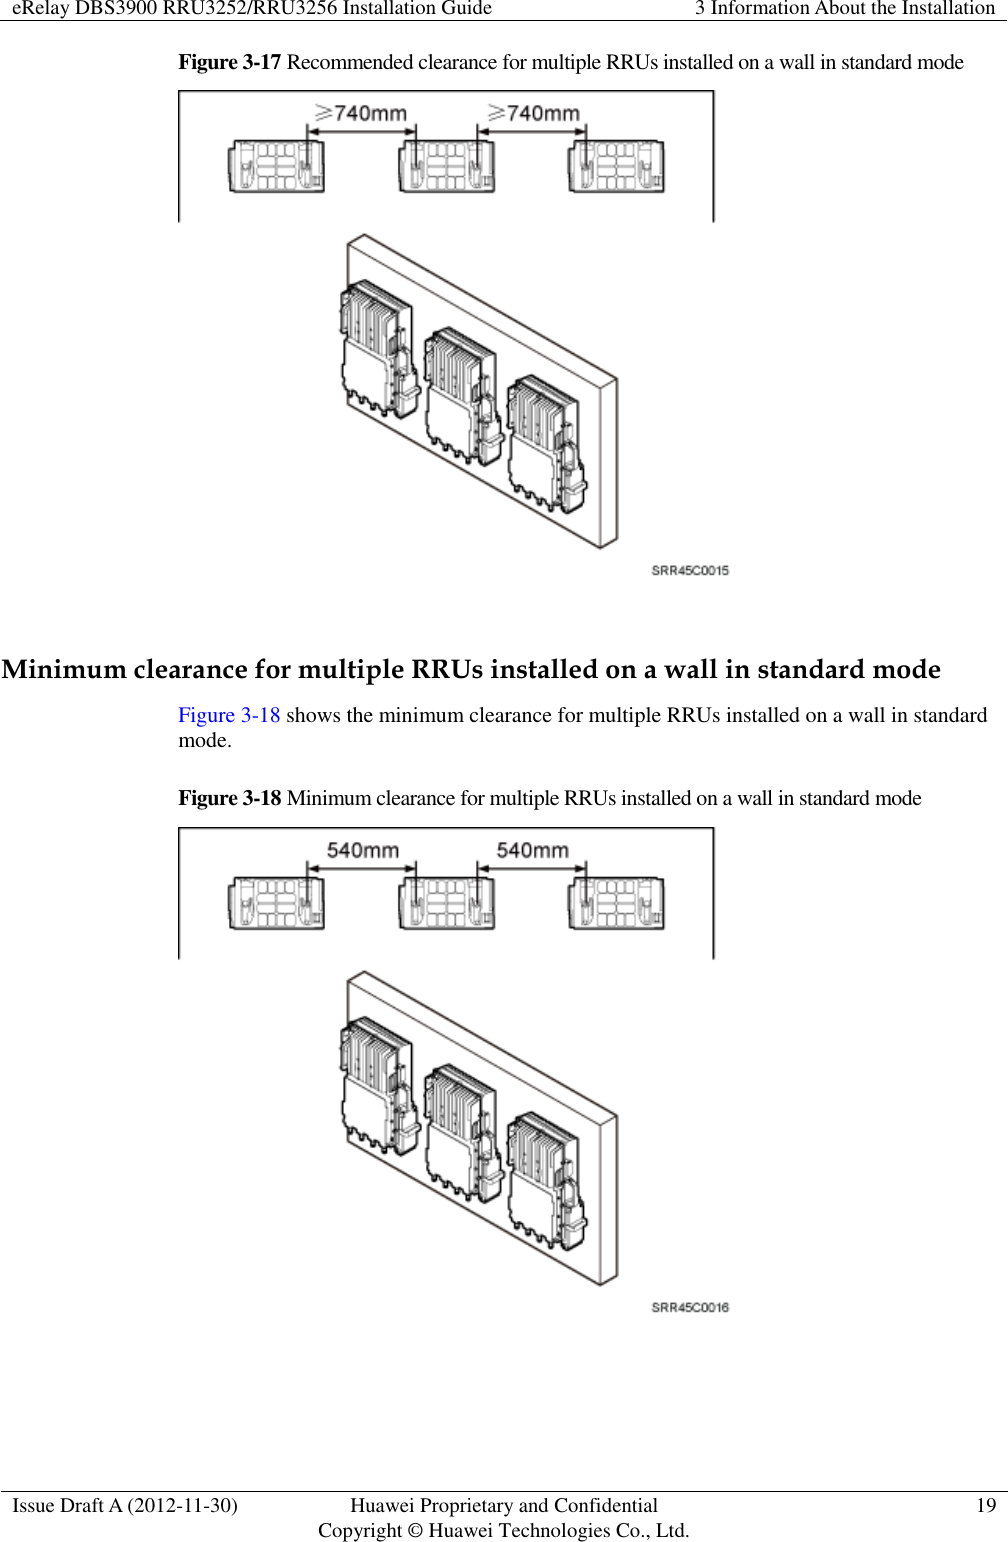 eRelay DBS3900 RRU3252/RRU3256 Installation Guide 3 Information About the Installation  Issue Draft A (2012-11-30) Huawei Proprietary and Confidential                                     Copyright © Huawei Technologies Co., Ltd. 19  Figure 3-17 Recommended clearance for multiple RRUs installed on a wall in standard mode   Minimum clearance for multiple RRUs installed on a wall in standard mode Figure 3-18 shows the minimum clearance for multiple RRUs installed on a wall in standard mode. Figure 3-18 Minimum clearance for multiple RRUs installed on a wall in standard mode   